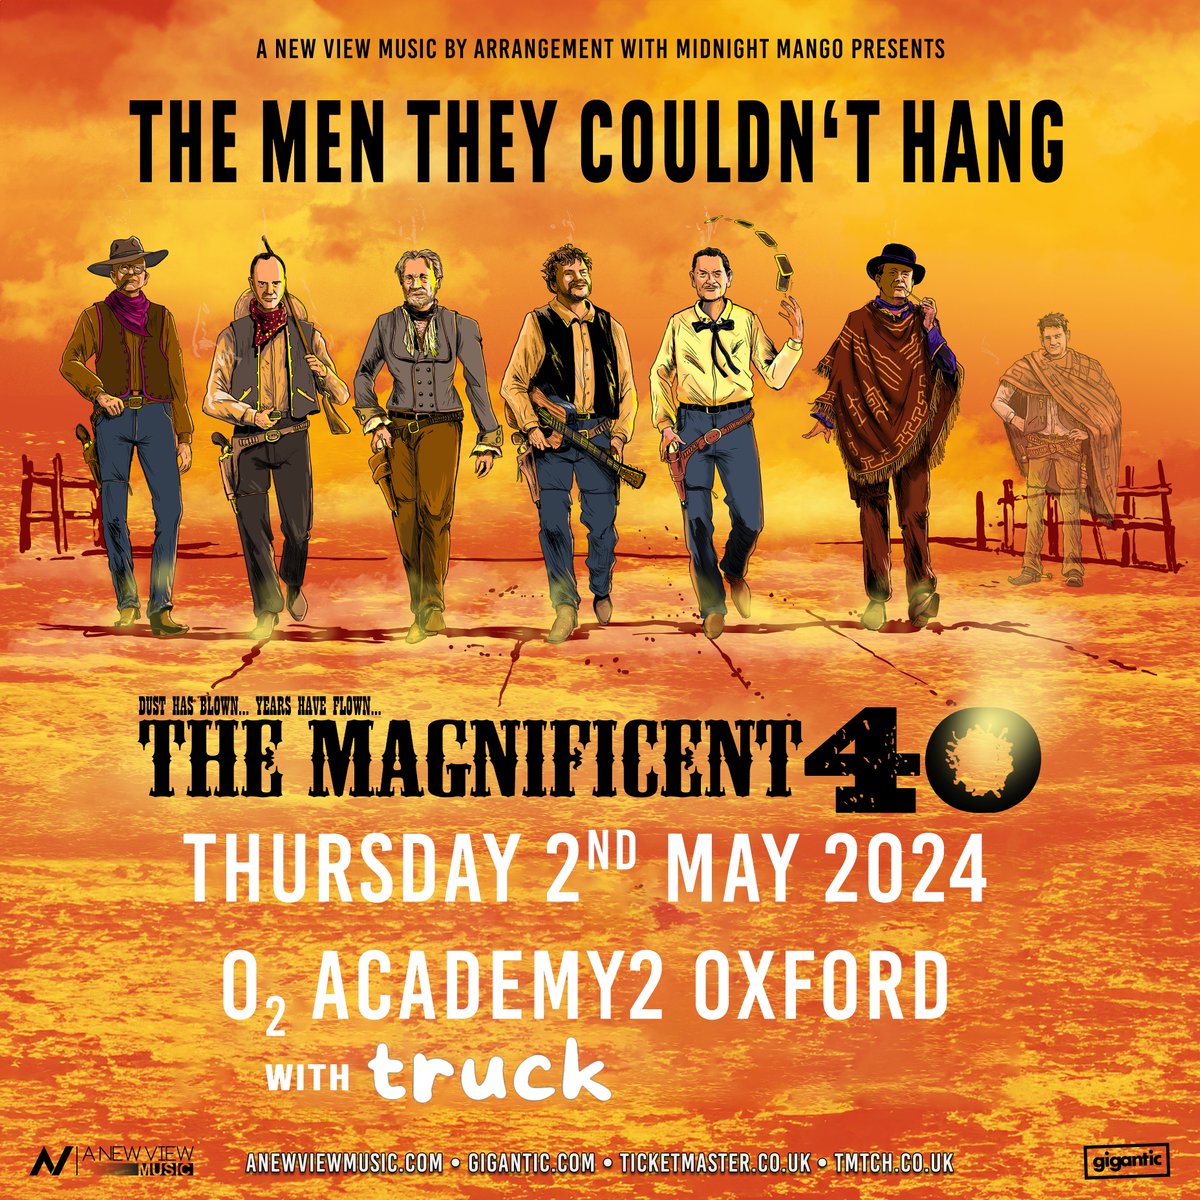 🚨 OXFORD 🚨 We're very excited to be heading to the @O2AcademyOxford (room 2) next week to support Folk Punk legends @TMTCHmusic 🤠 ⚡️ Head to linktr.ee/trucktheband to grab some cheap tickets now! 🎟